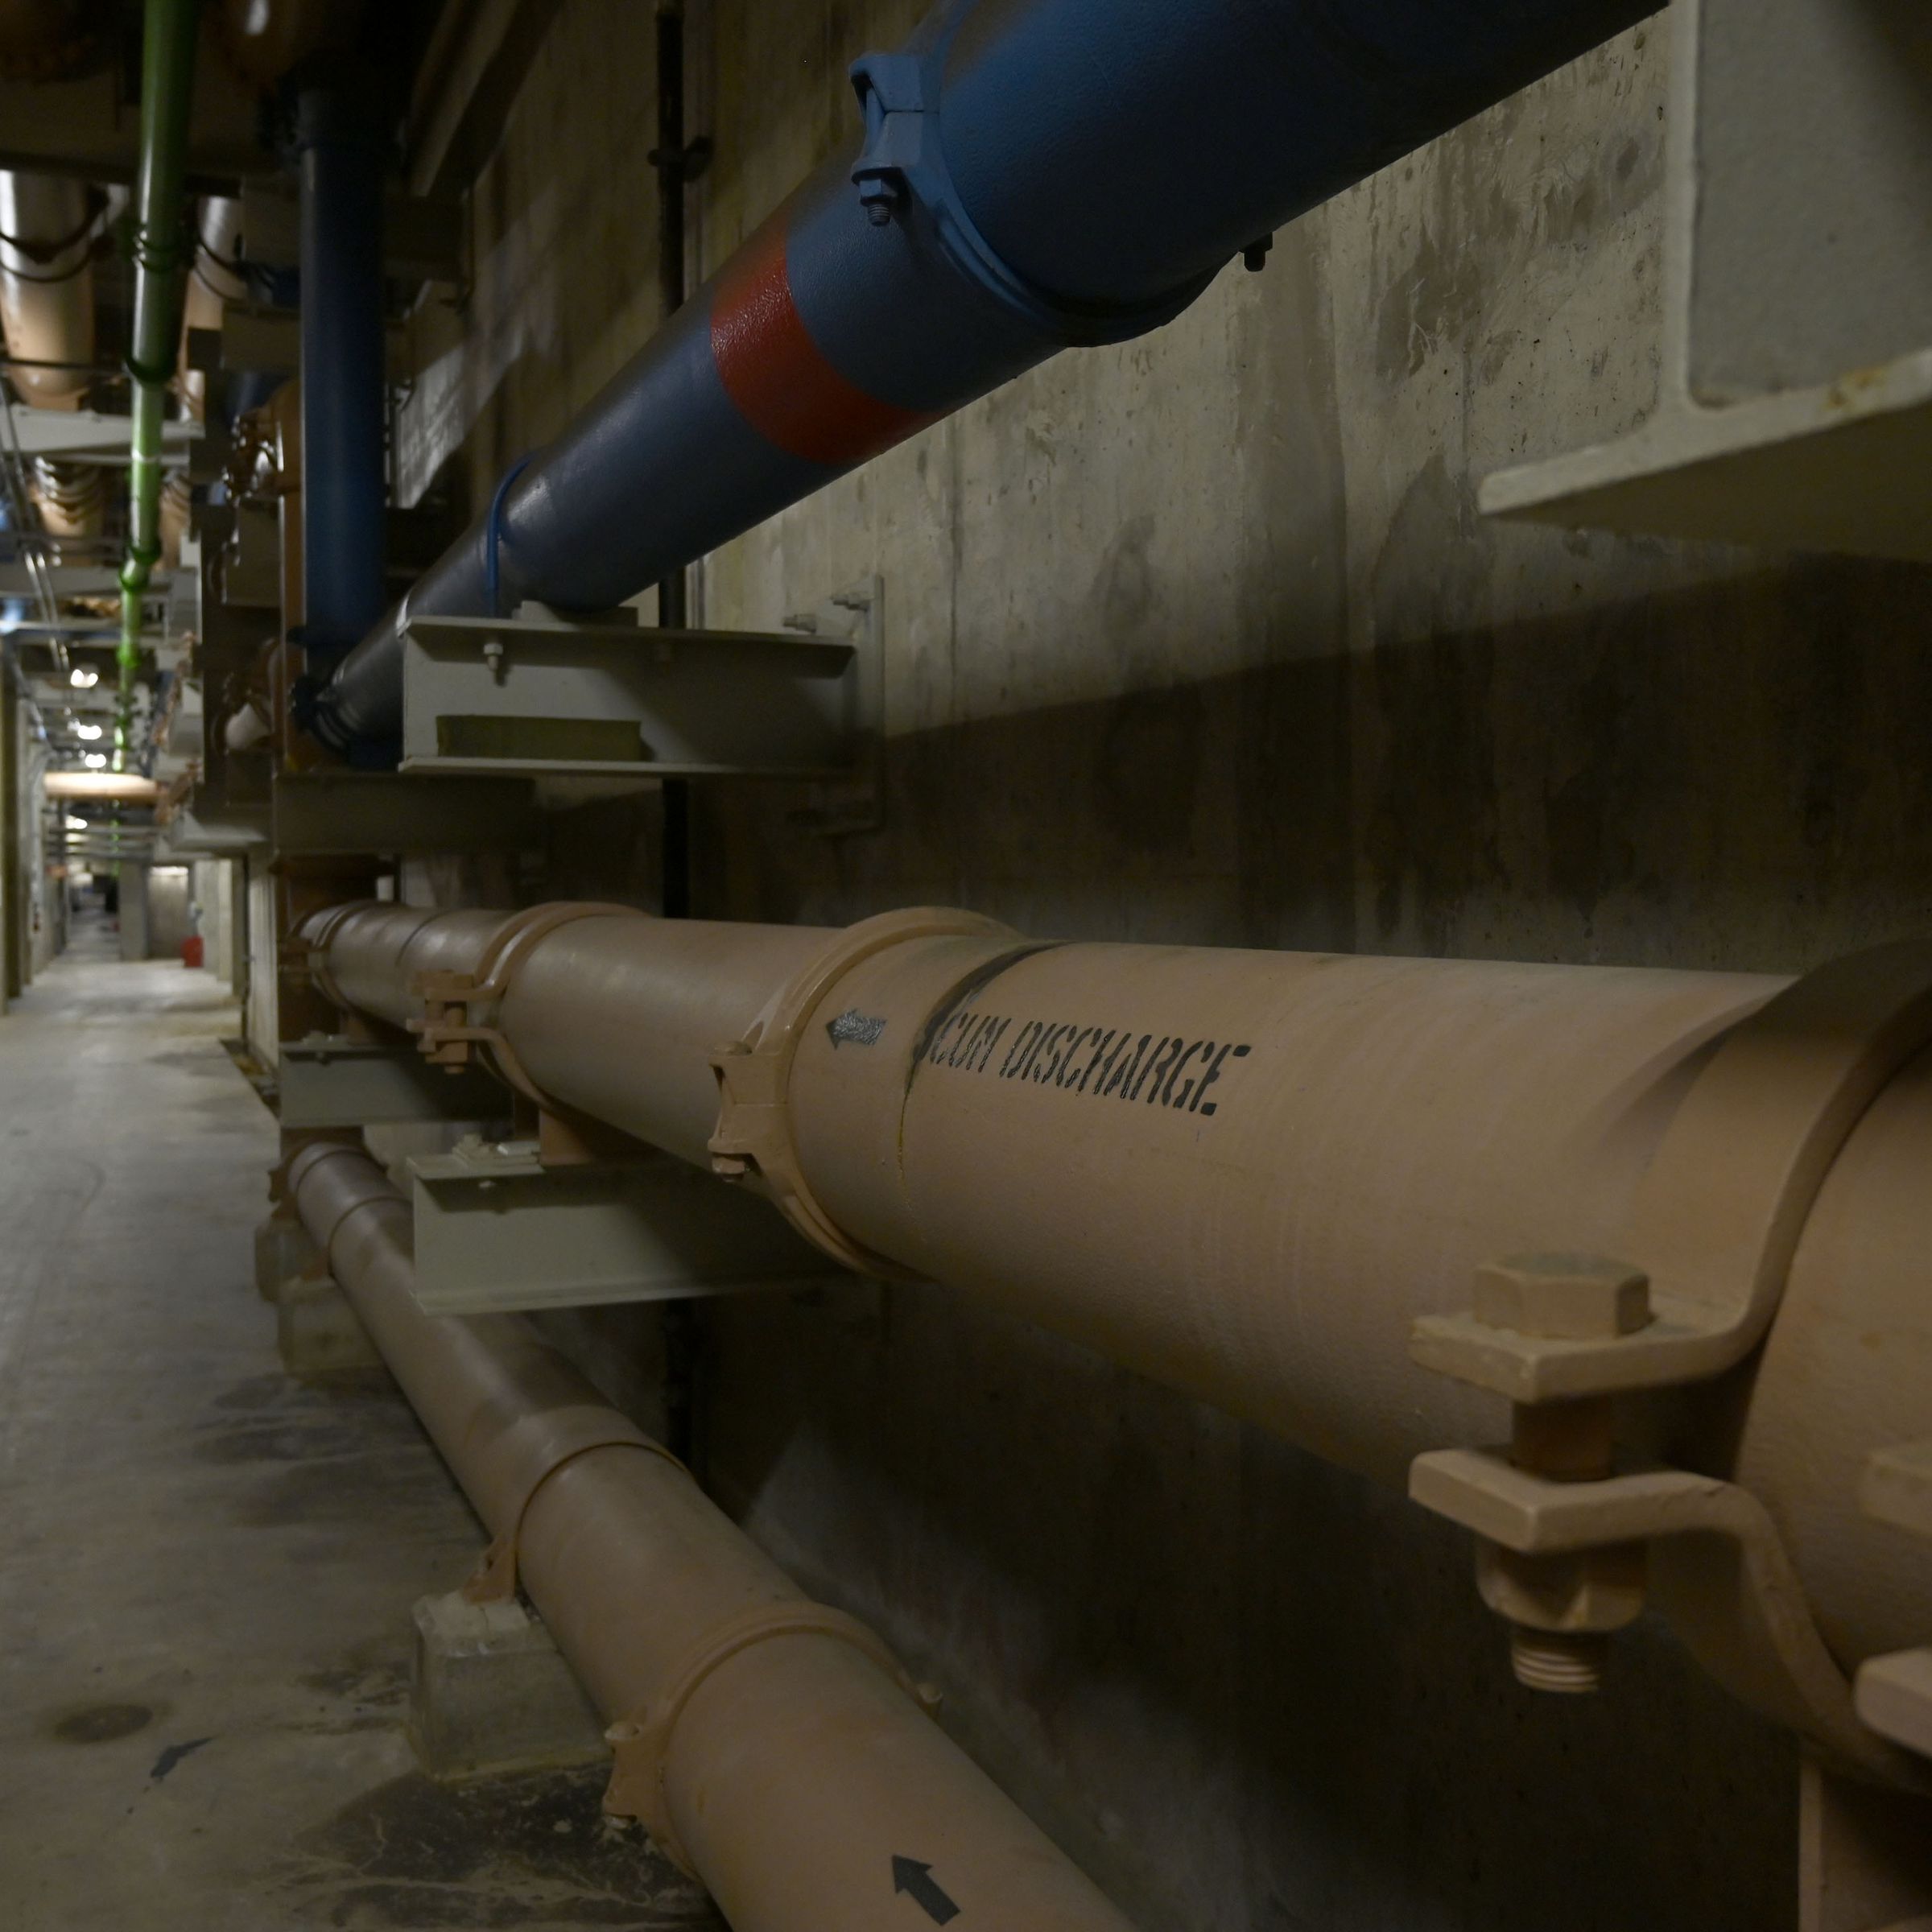 A network of underground pipes.